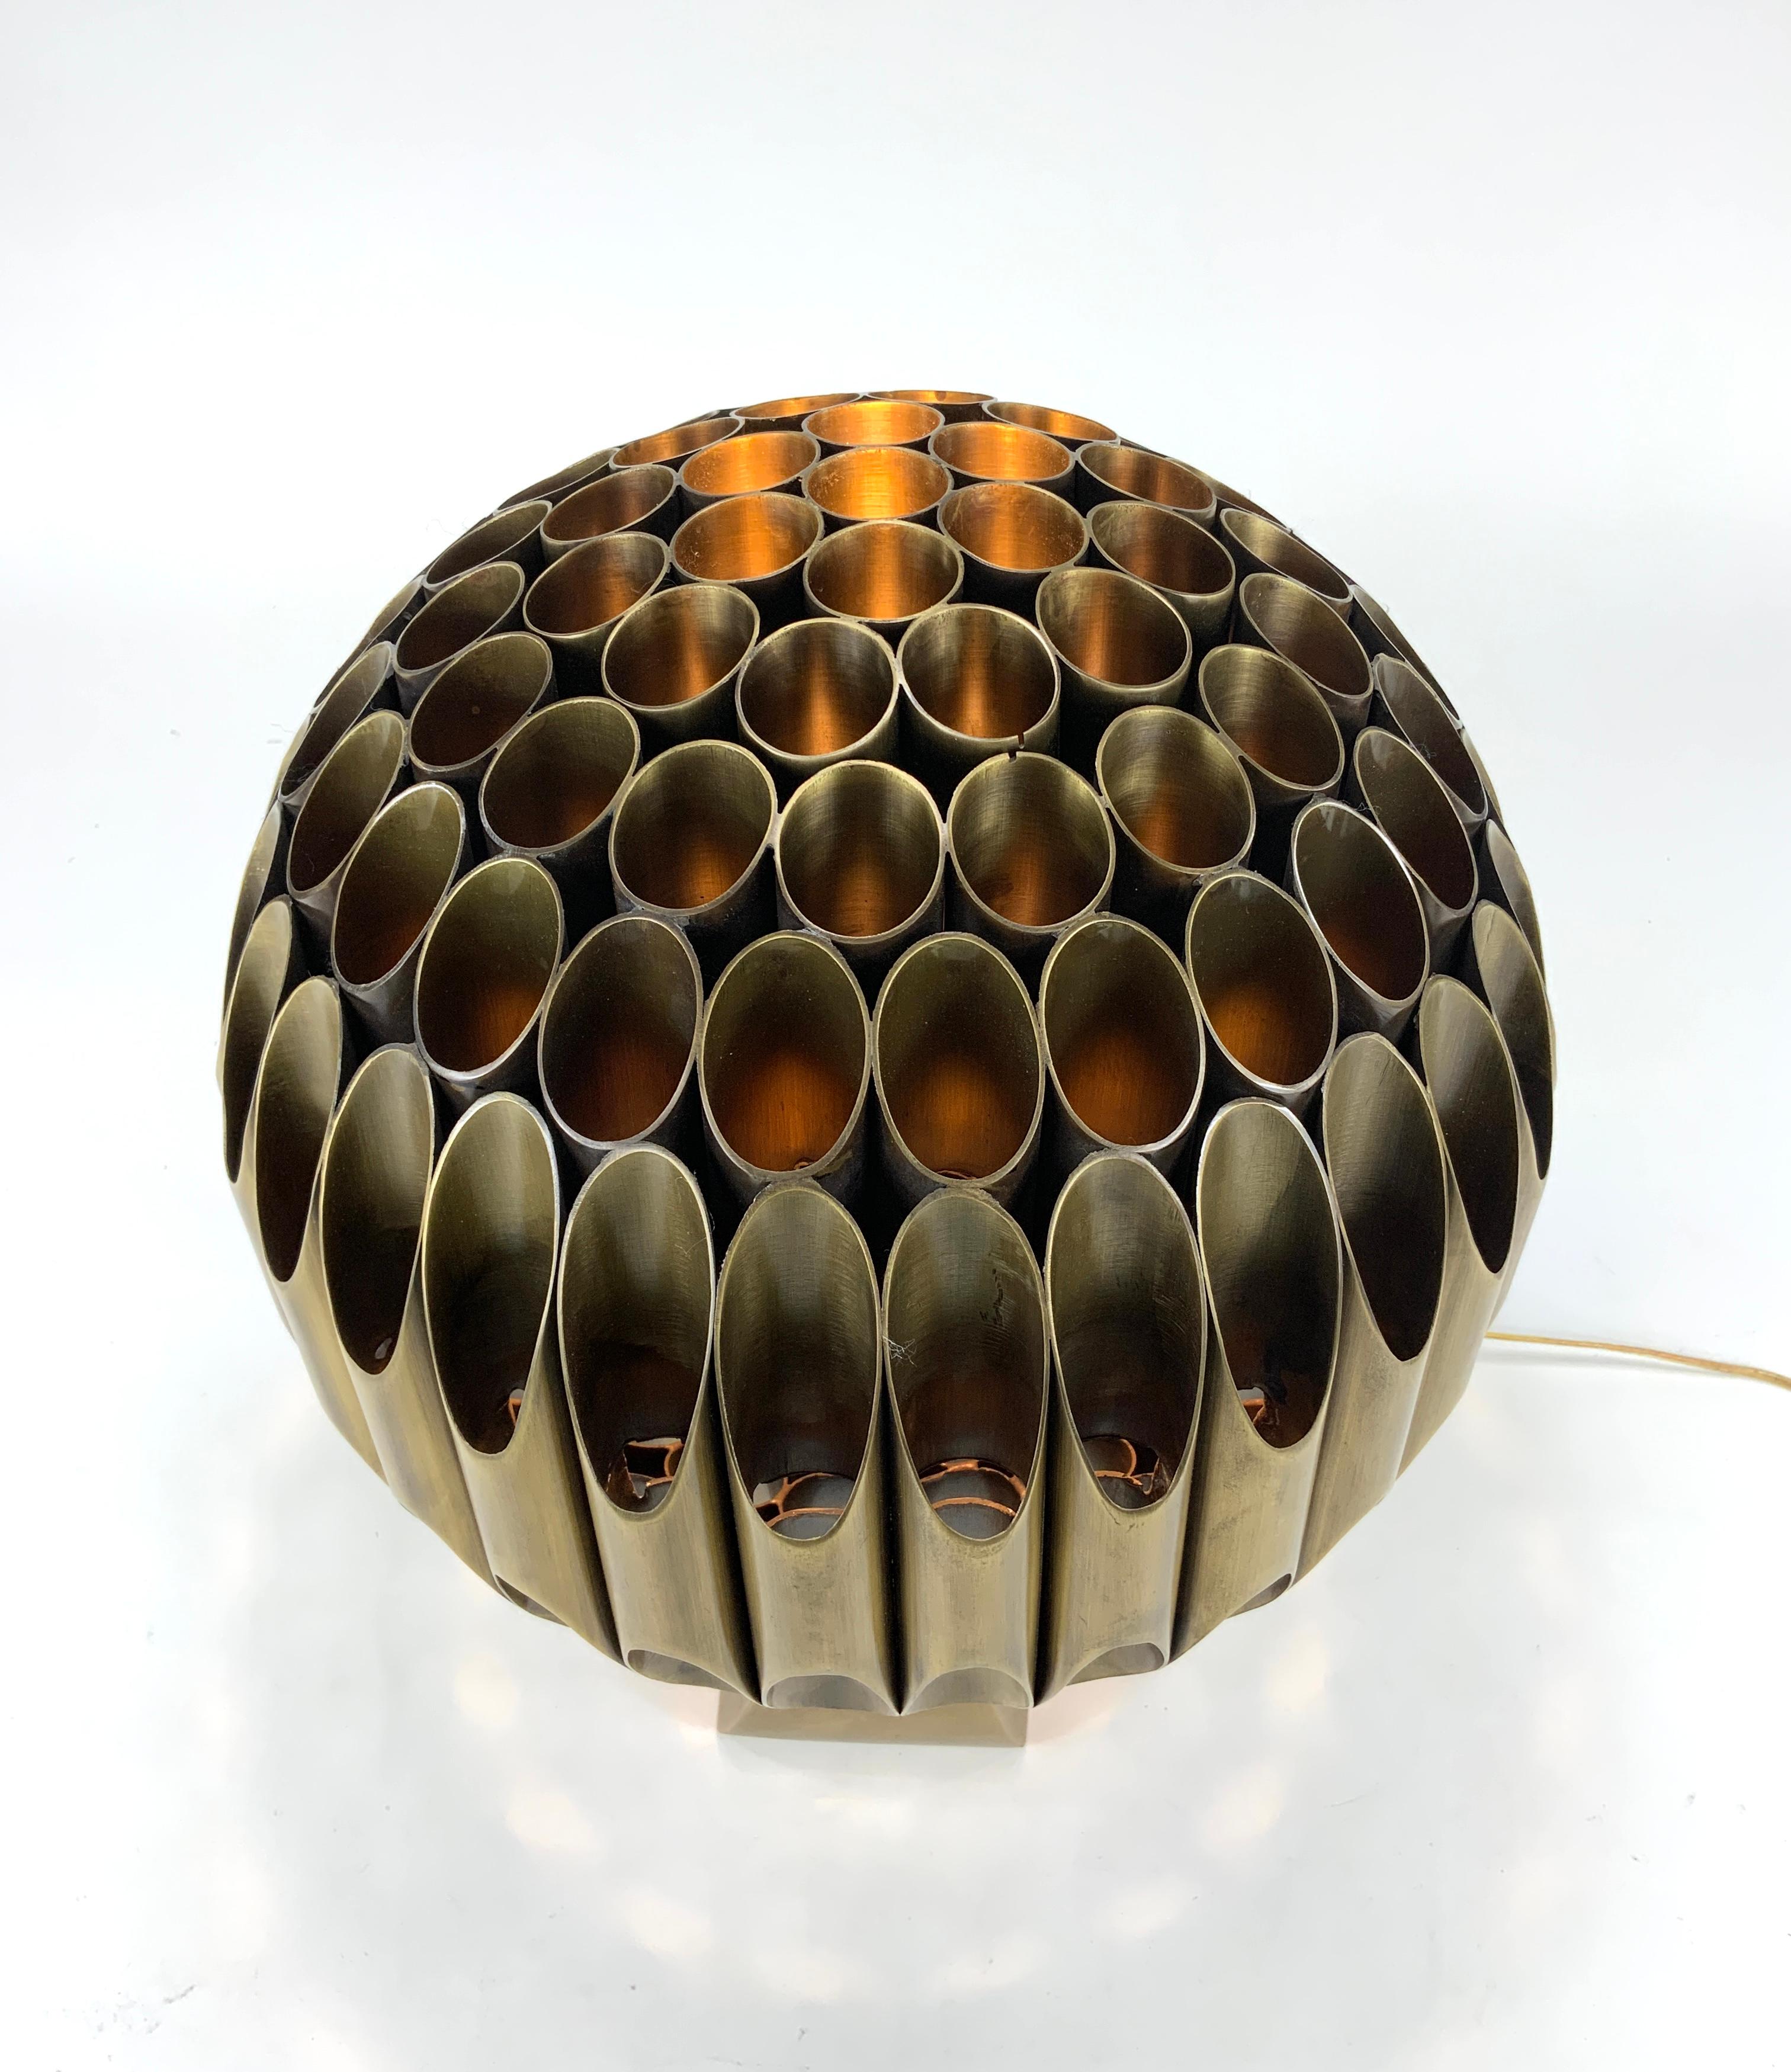 Michel Armand’s sculptural gilded bronze table lamp “Ruche” consists of metal cylindrical tubes that have been welded together and shaped into a perfect spherical form resting on an arched metal base.  A portion of the lamp is removeable from the